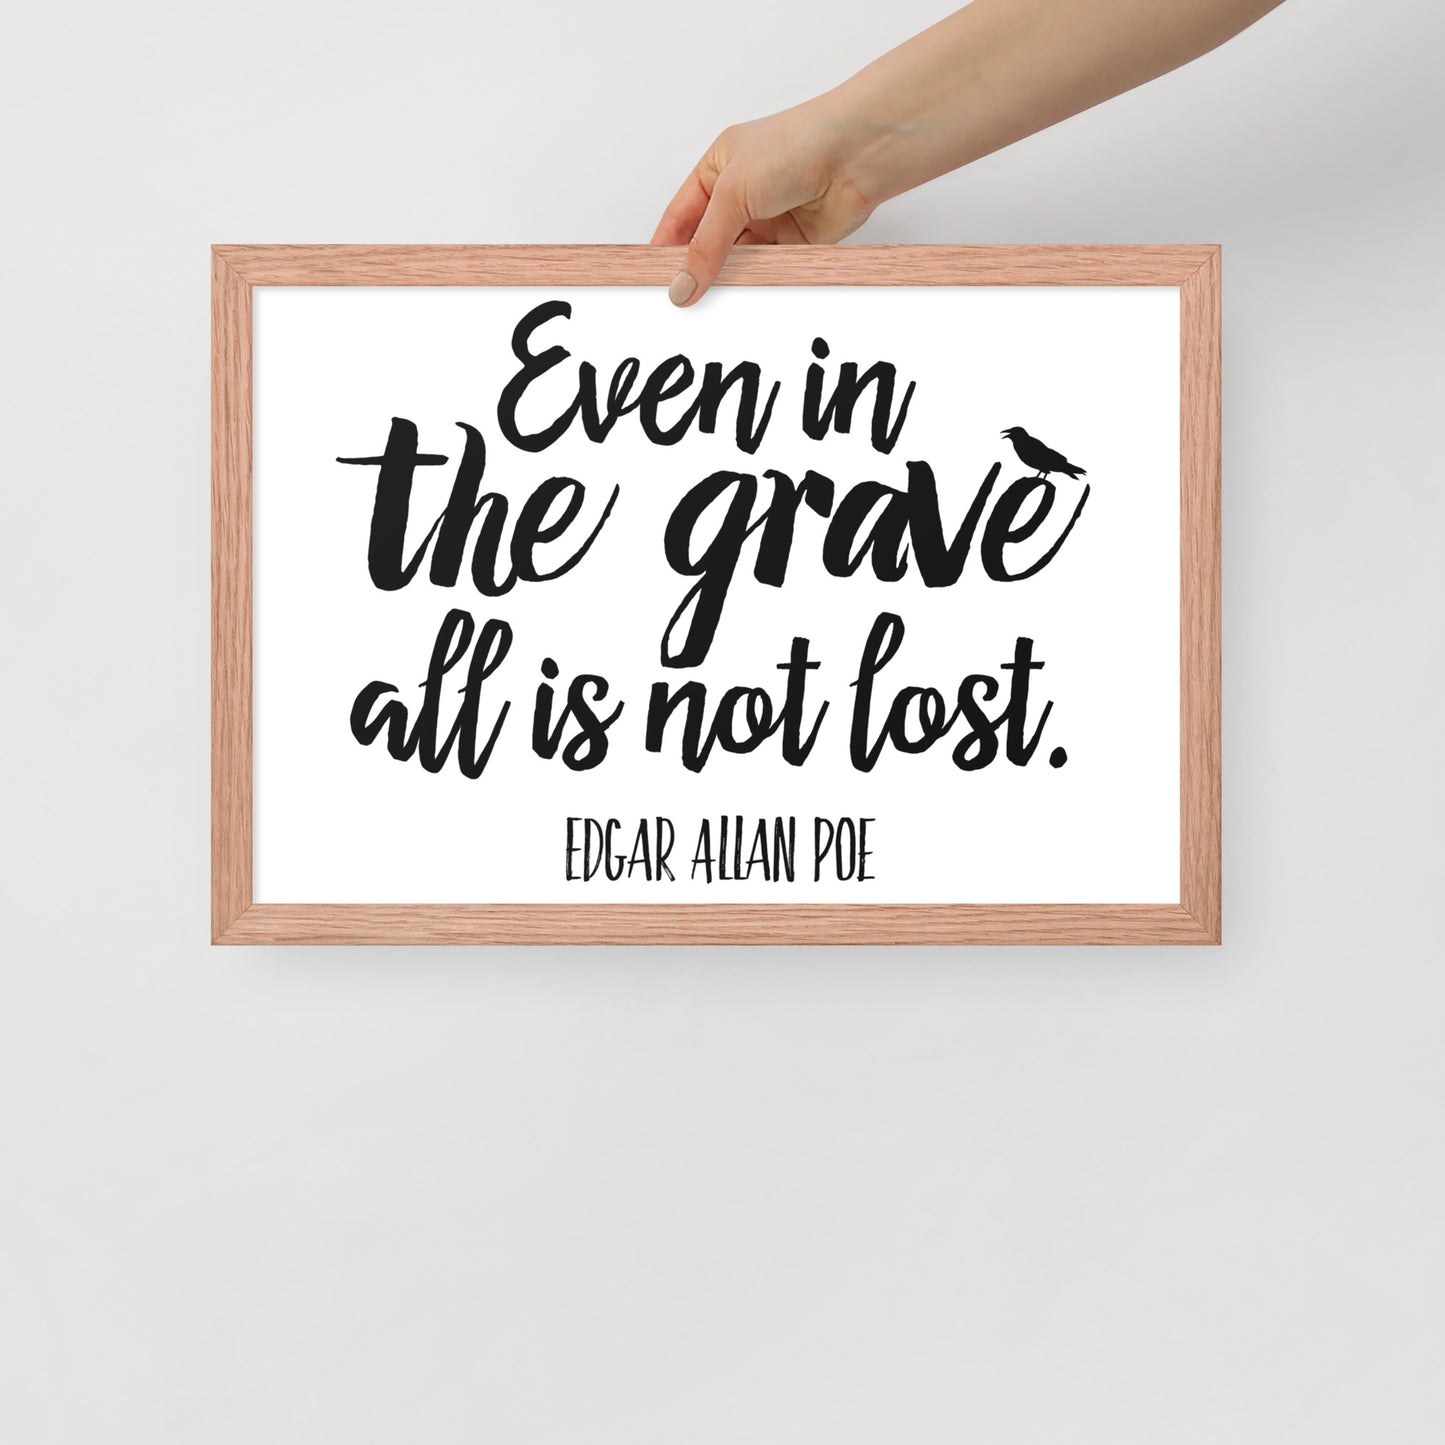 Even in the Grave - Edgar Allan Poe Quote Framed Poster - 12 x 18 Red Oak Frame